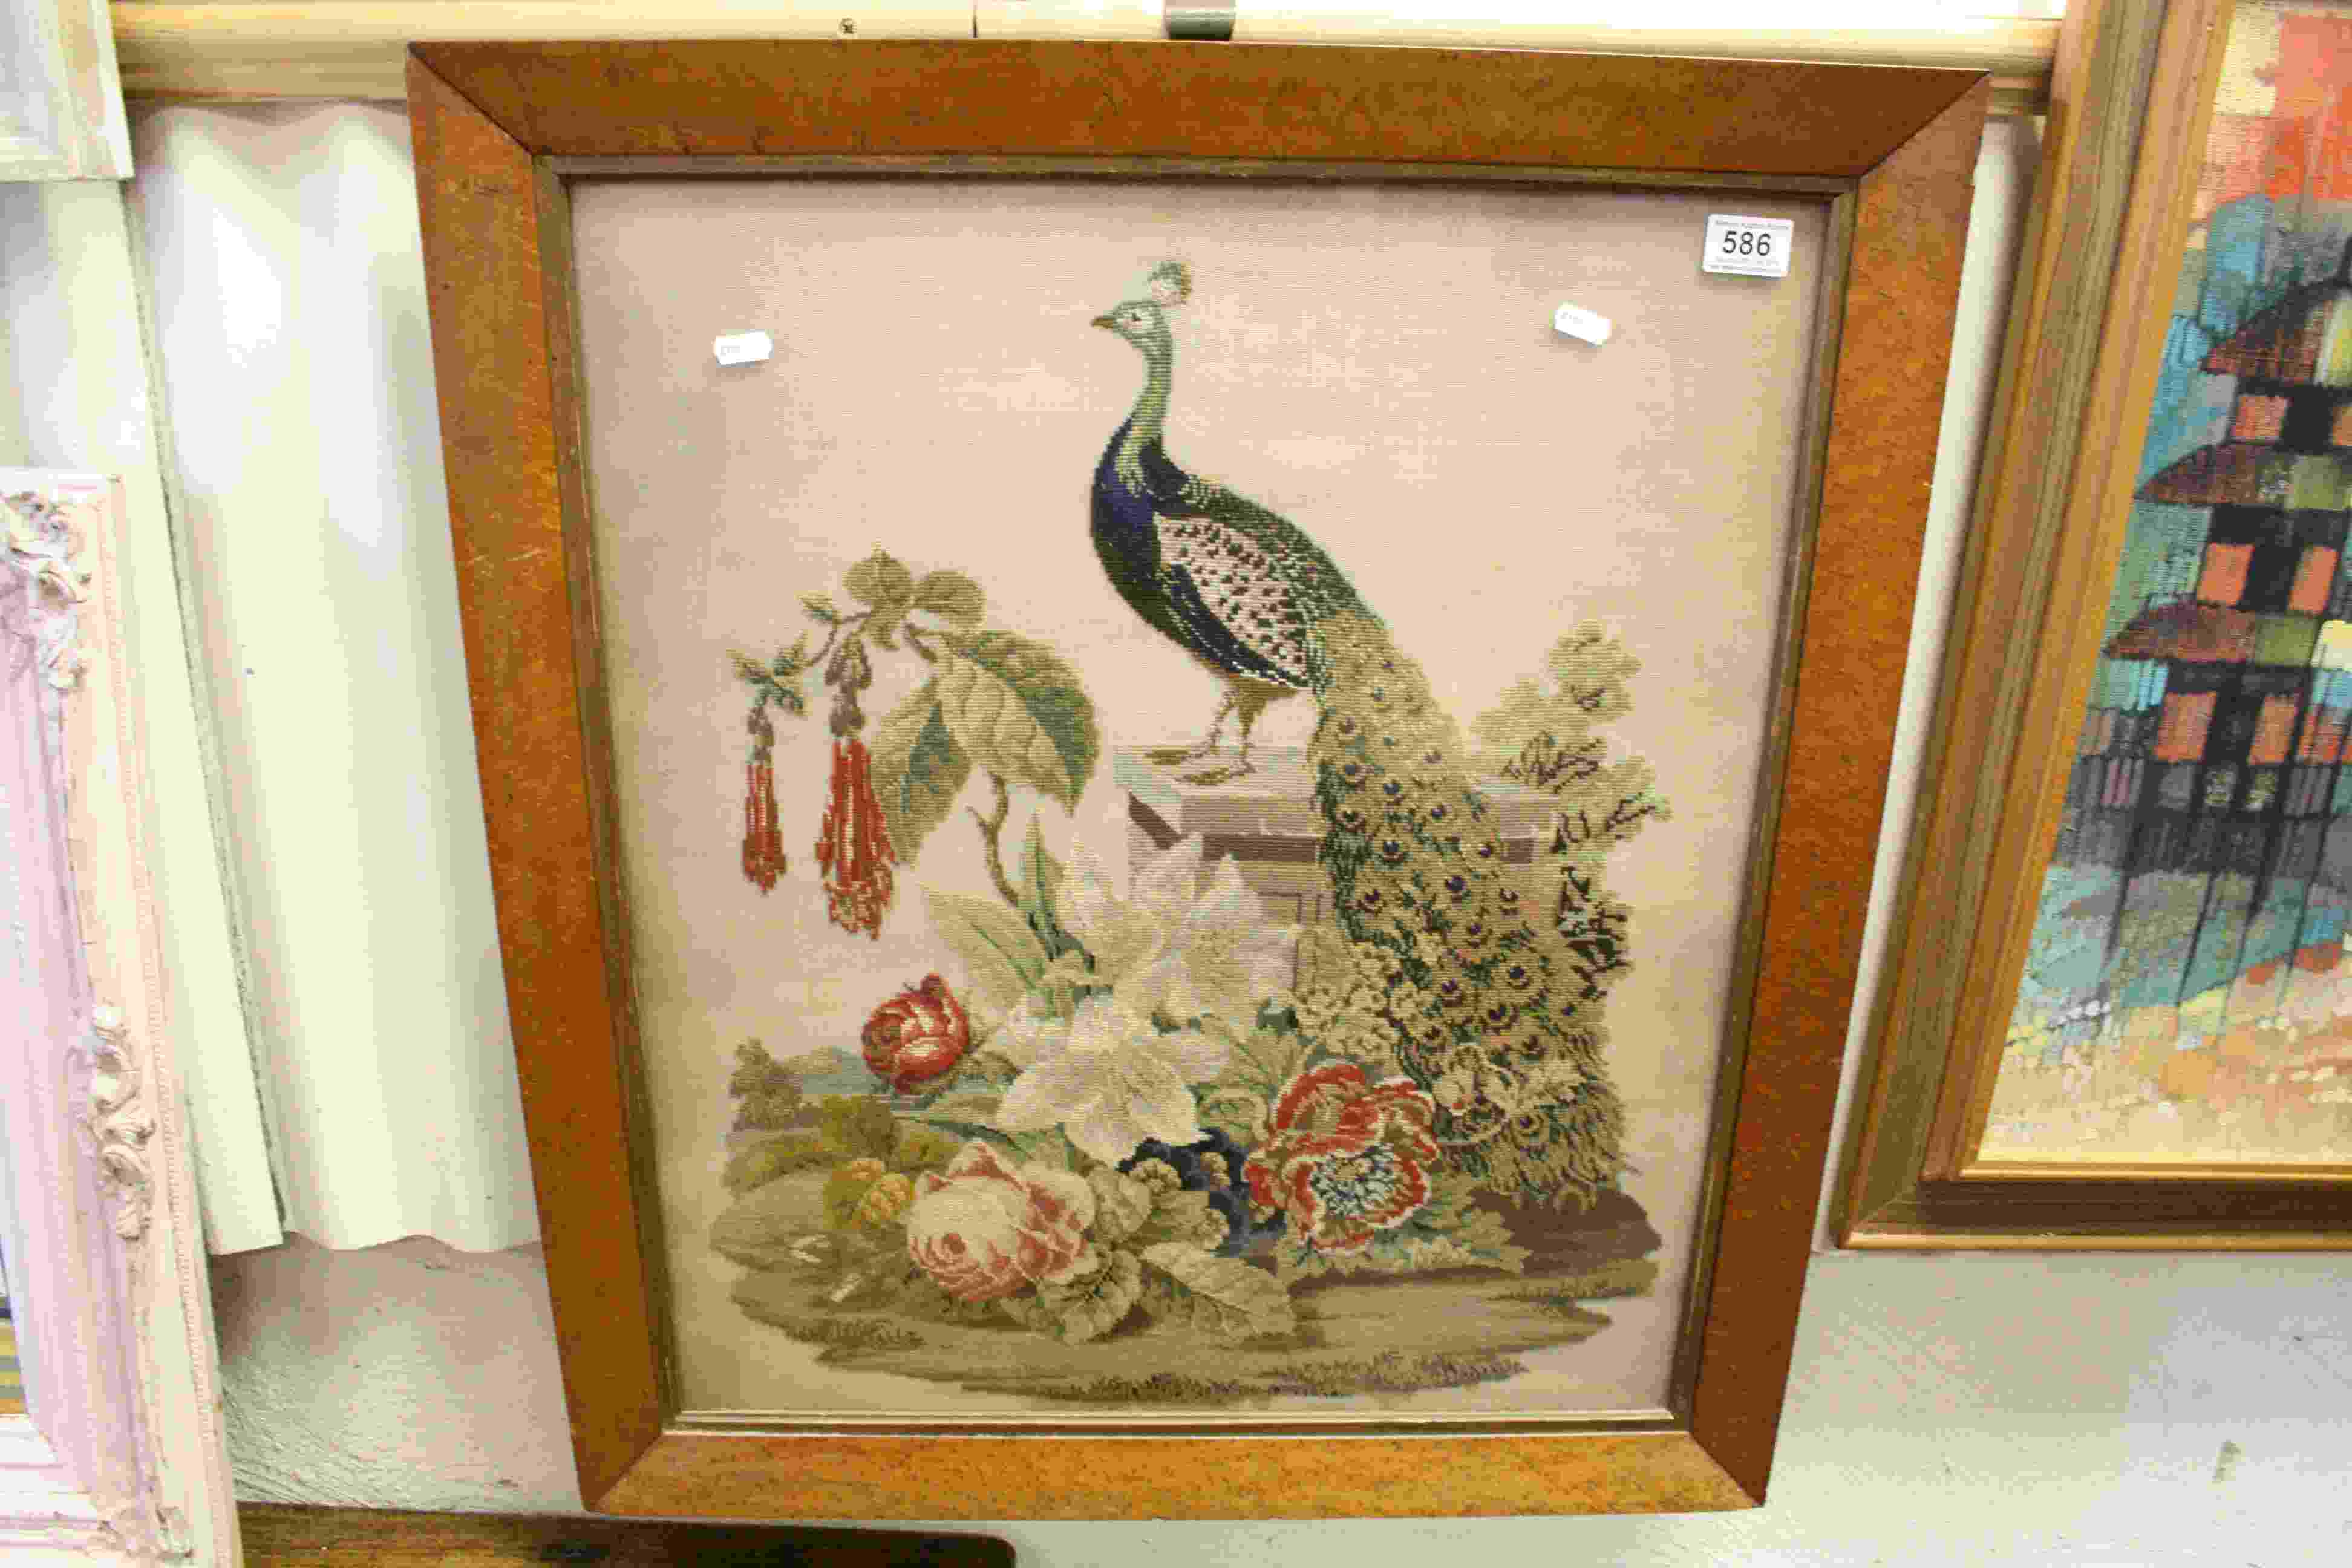 Framed and glazed tapestry of a peacock within floral scene approx. 77cm x 68cm